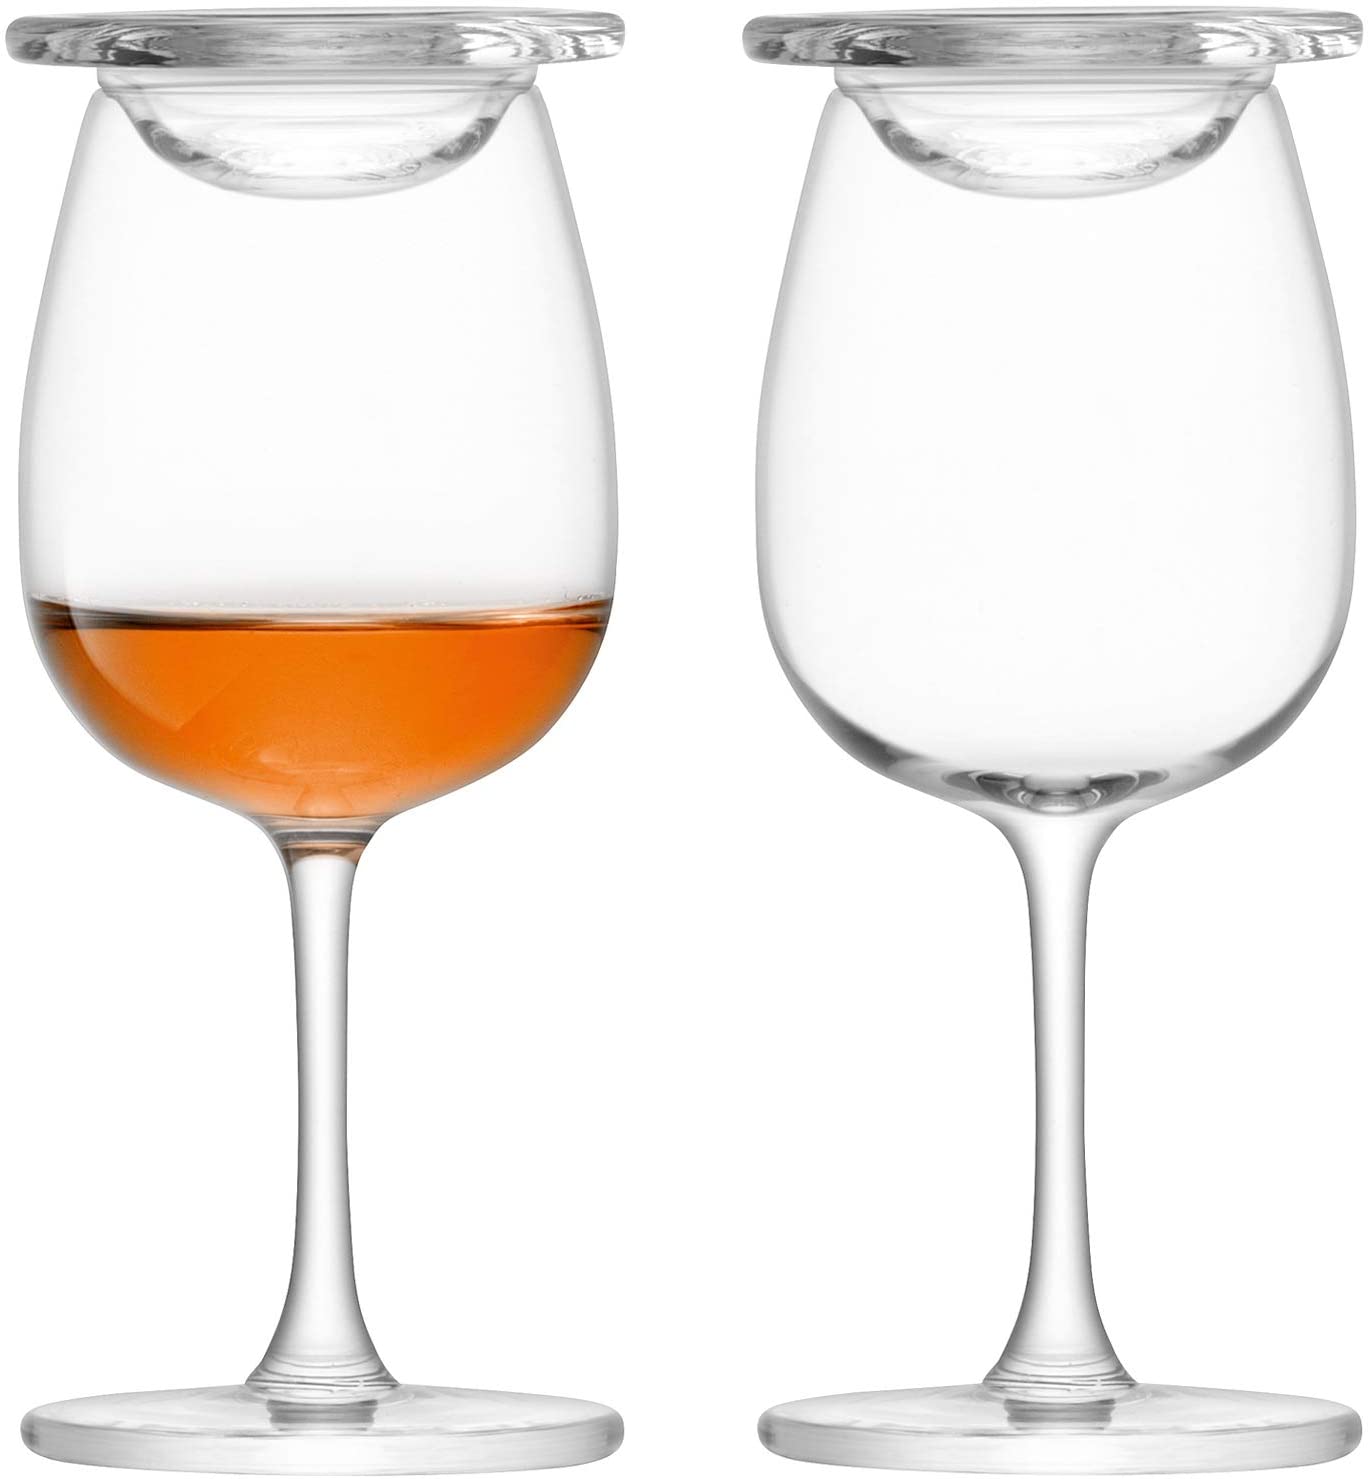 LSA Whisky Islay Nosing Glasses with Glass Cover 110ml - Set of 2 - Gift Boxed Whiskey Tasting Glass